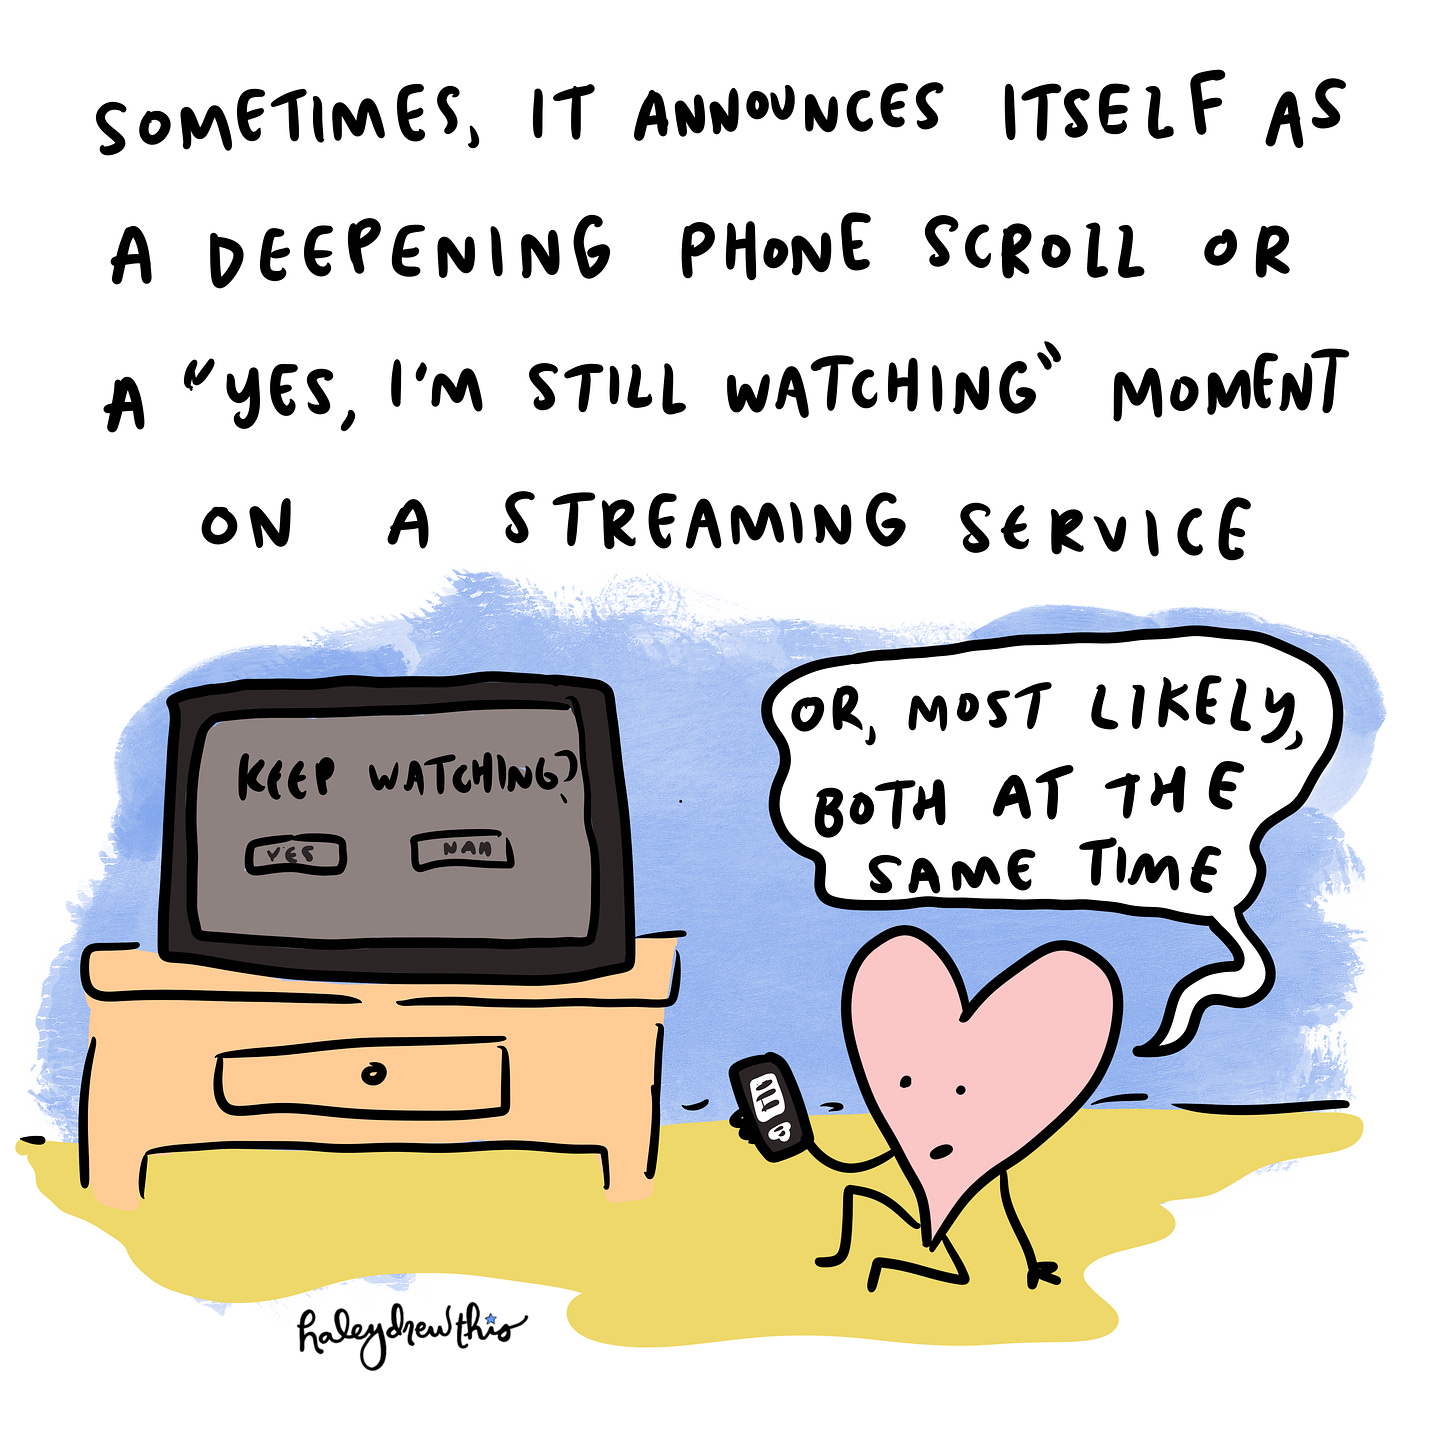 Sometimes, it announces itself as a deepening phone scroll or a "yes, I'm still waching" moment on a streaming service. Heart sitting in front of tv, saying "or, most likely, both."